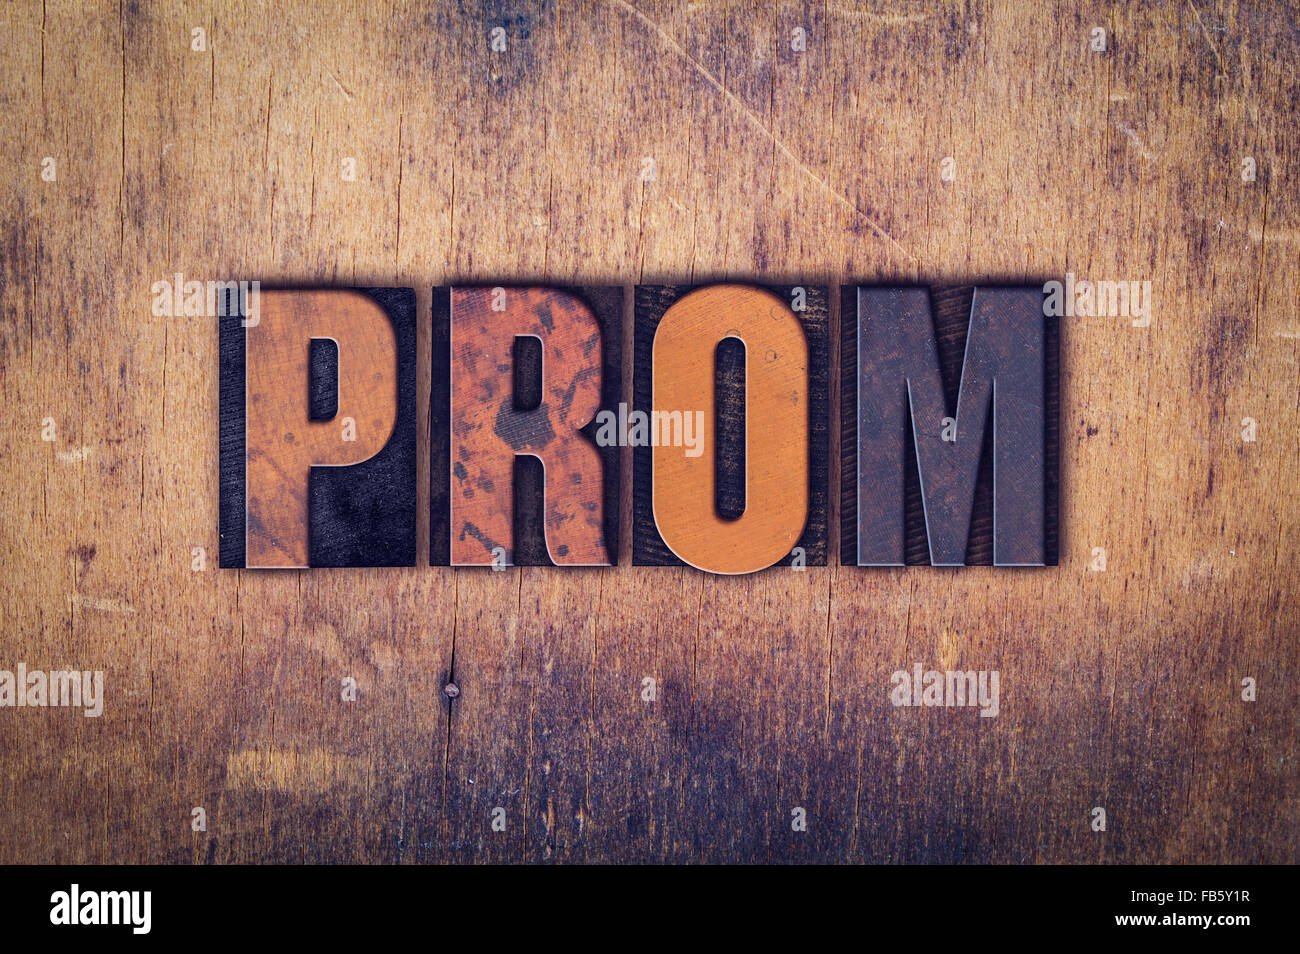 The word 'Prom' written in dirty vintage letterpress type on a aged wooden background. Stock Photo